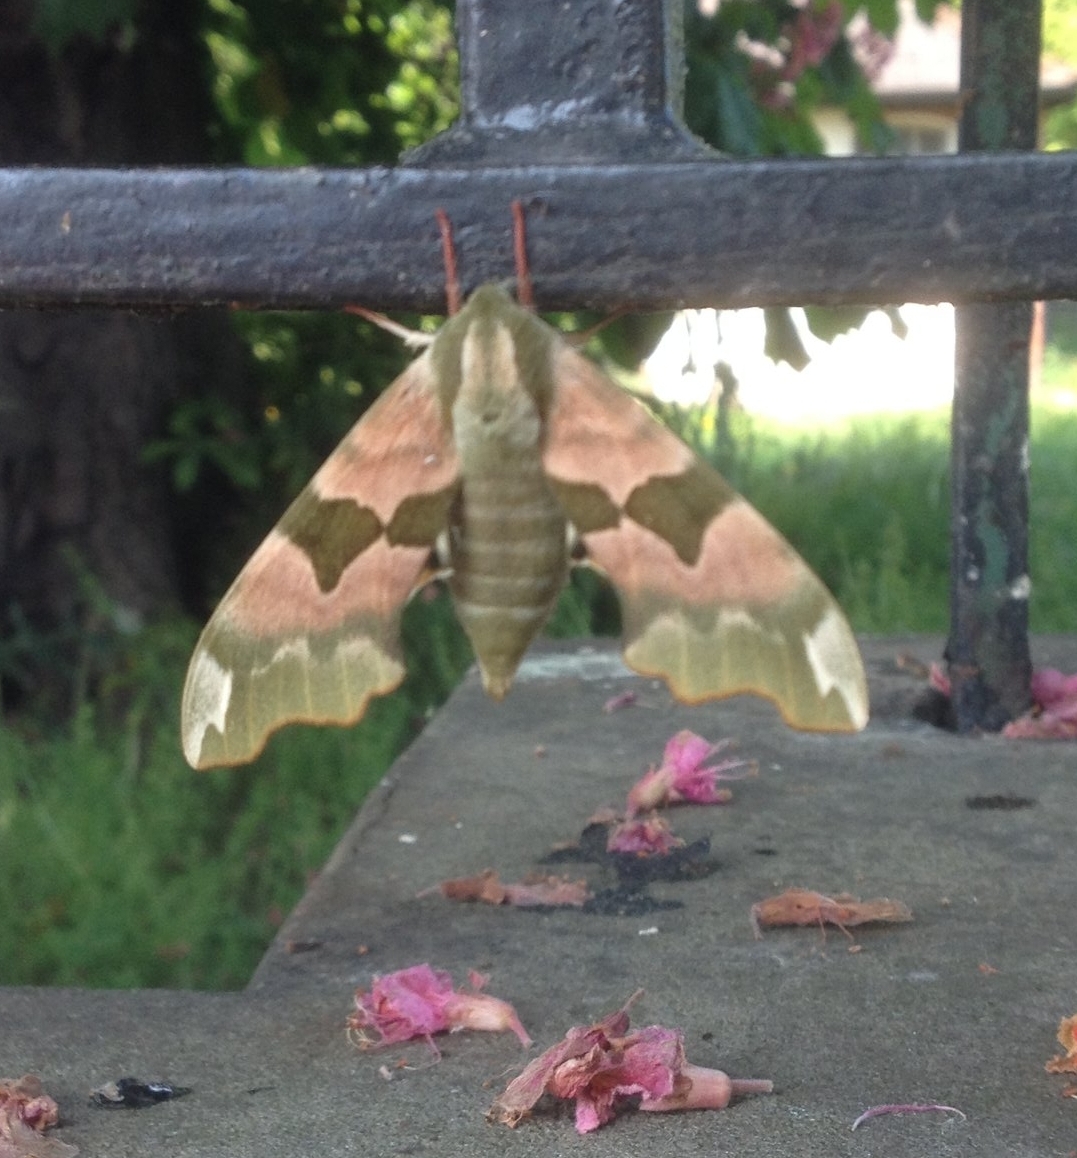  A moth clinging to the Park railings May 2017 